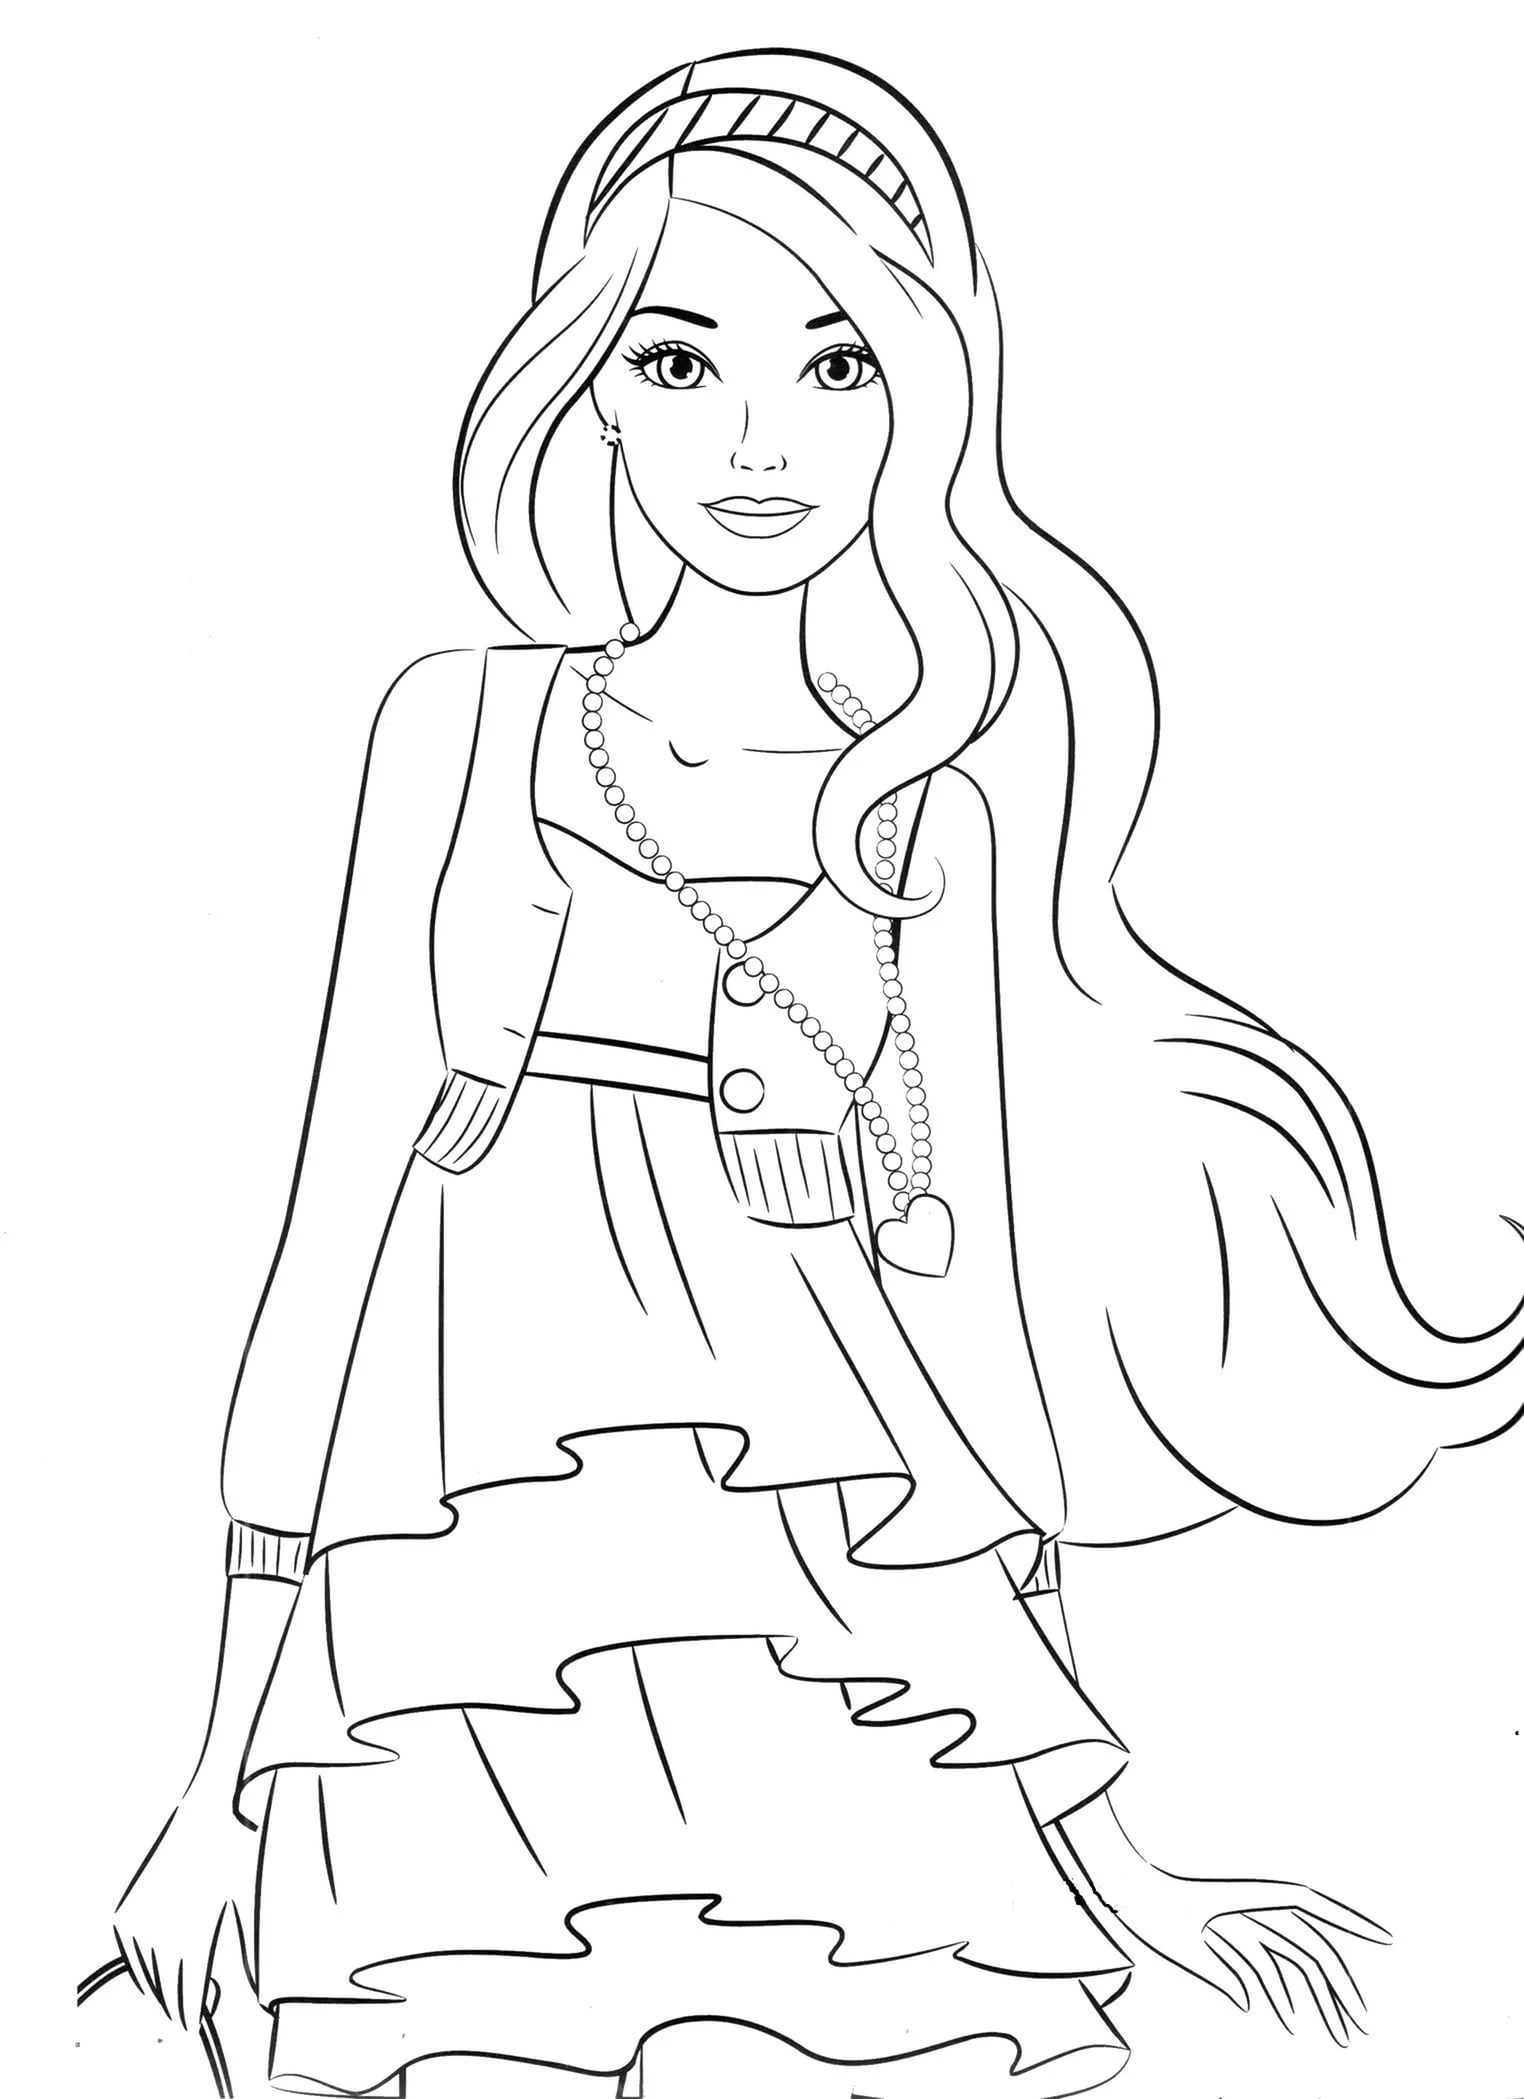 Coloring pages for 8,9,10 year old girls to download and print for free